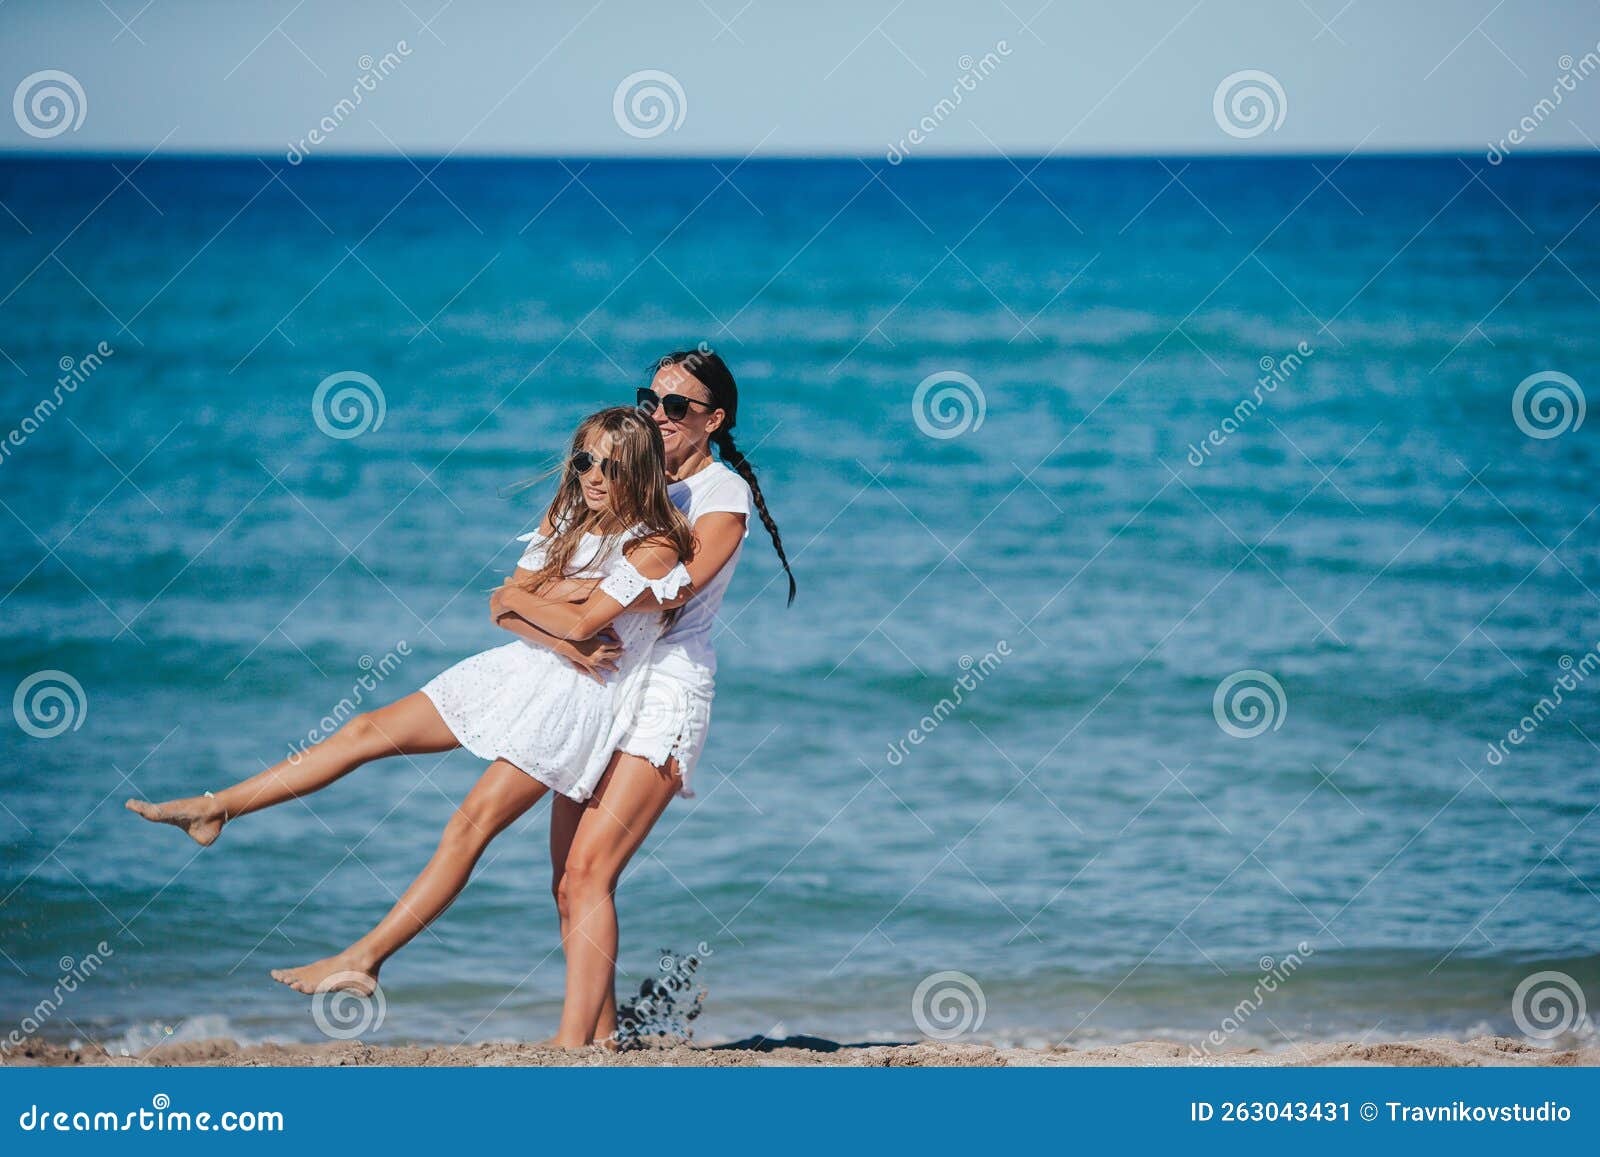 Young Happy Mother And And Her Daughter Having Fun On The Beach Stock Image Image Of Daughter 